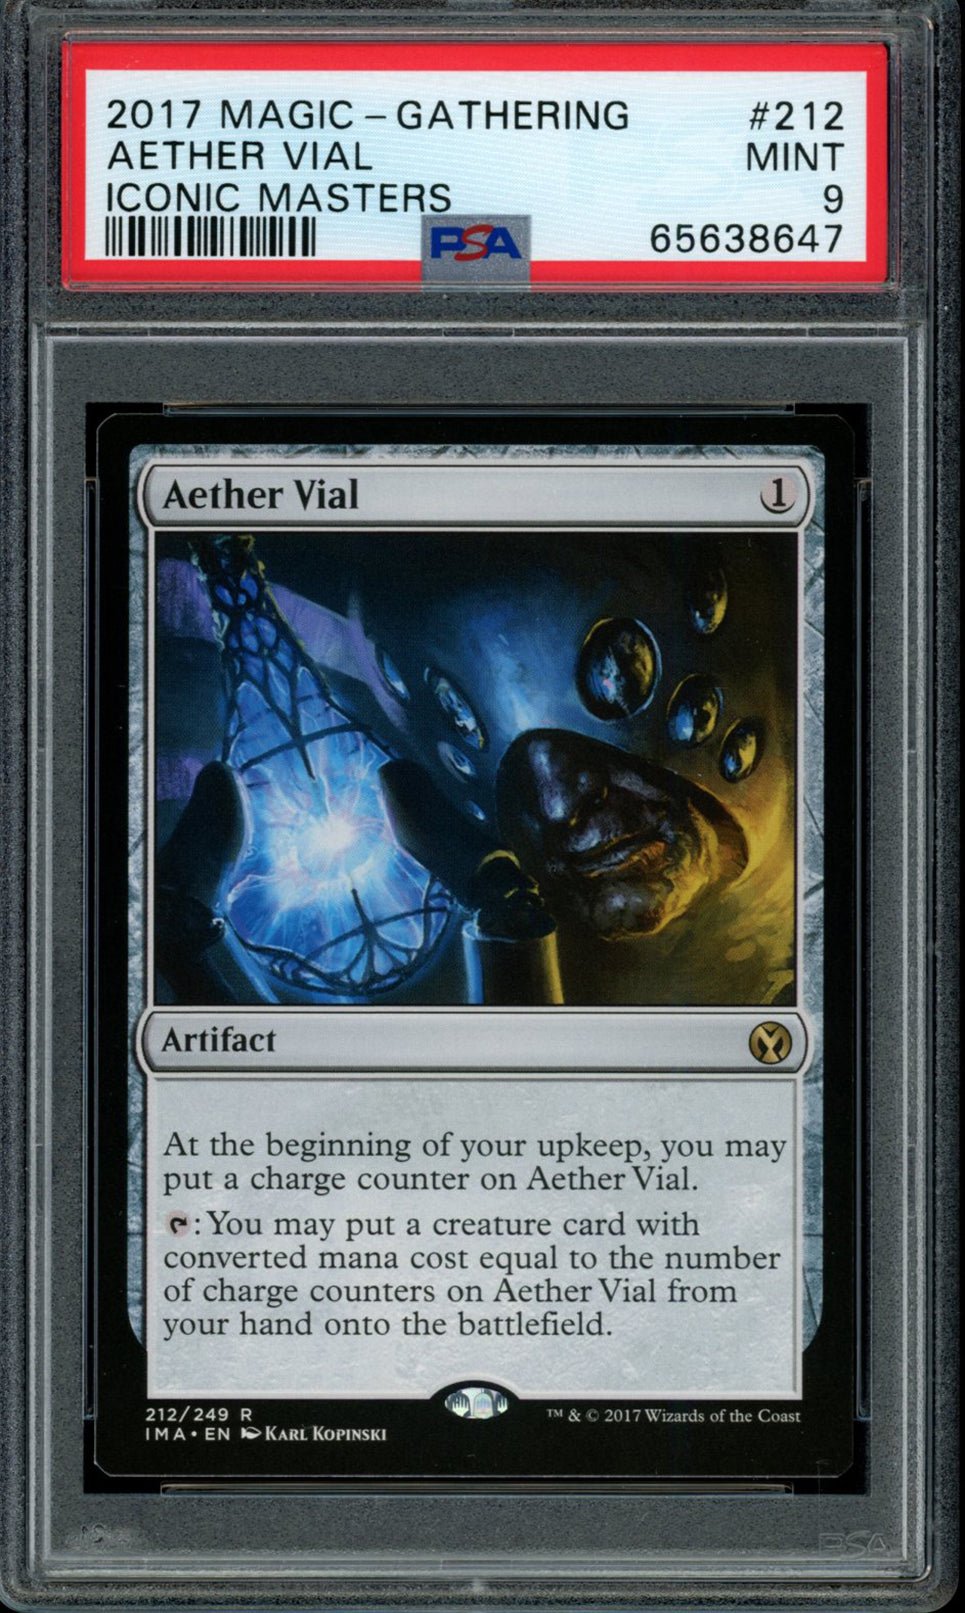 AETHER VIAL PSA 9 2017 Iconic Masters Magic the Gathering Rare 212 Magic the Gathering Base Graded Cards - Hobby Gems